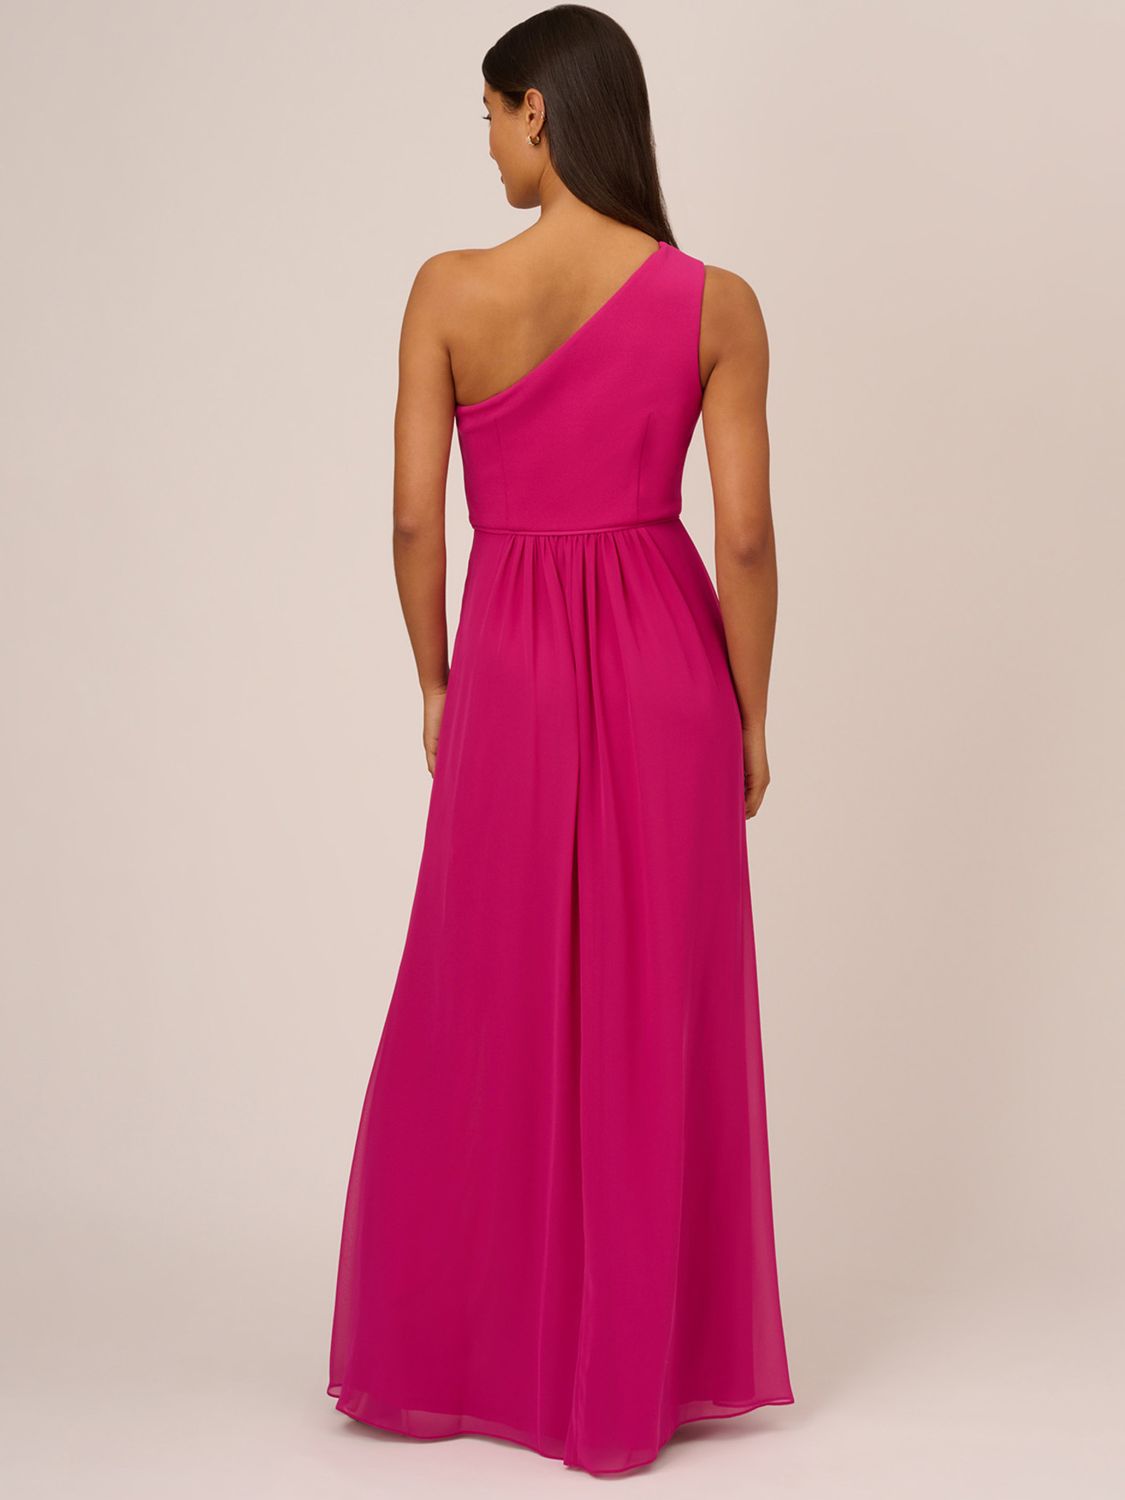 Adrianna Papell One Shoulder Chiffon Gown, Bright Magenta, 8